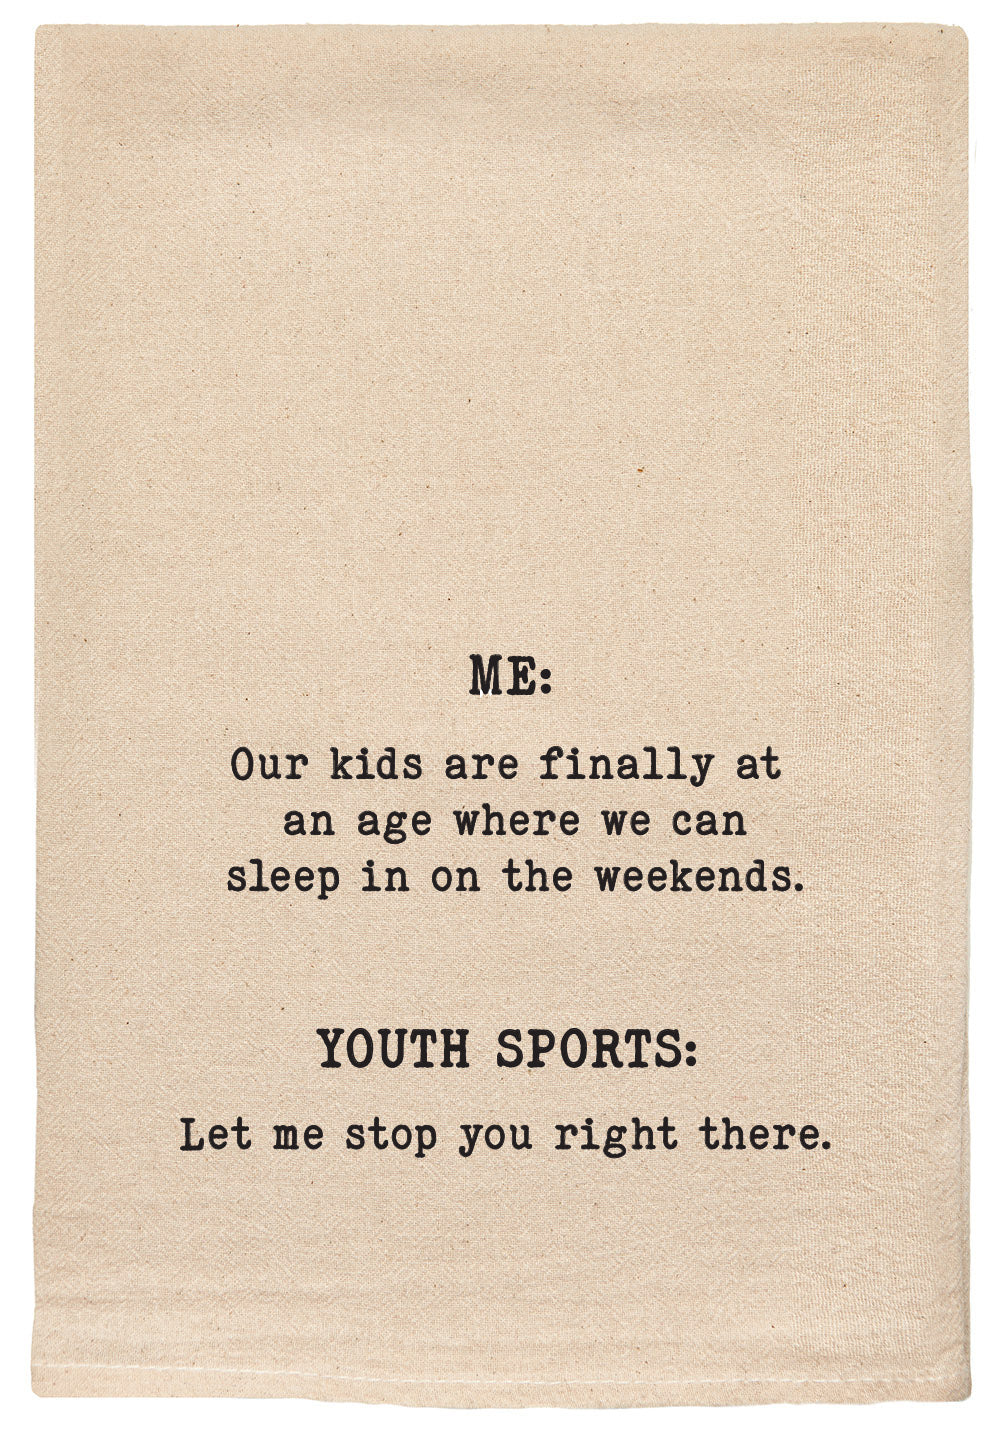 Me: Our kids are finally at an age where we can sleep in on the weekends.  Youth Sports: Let me just stop you right there.